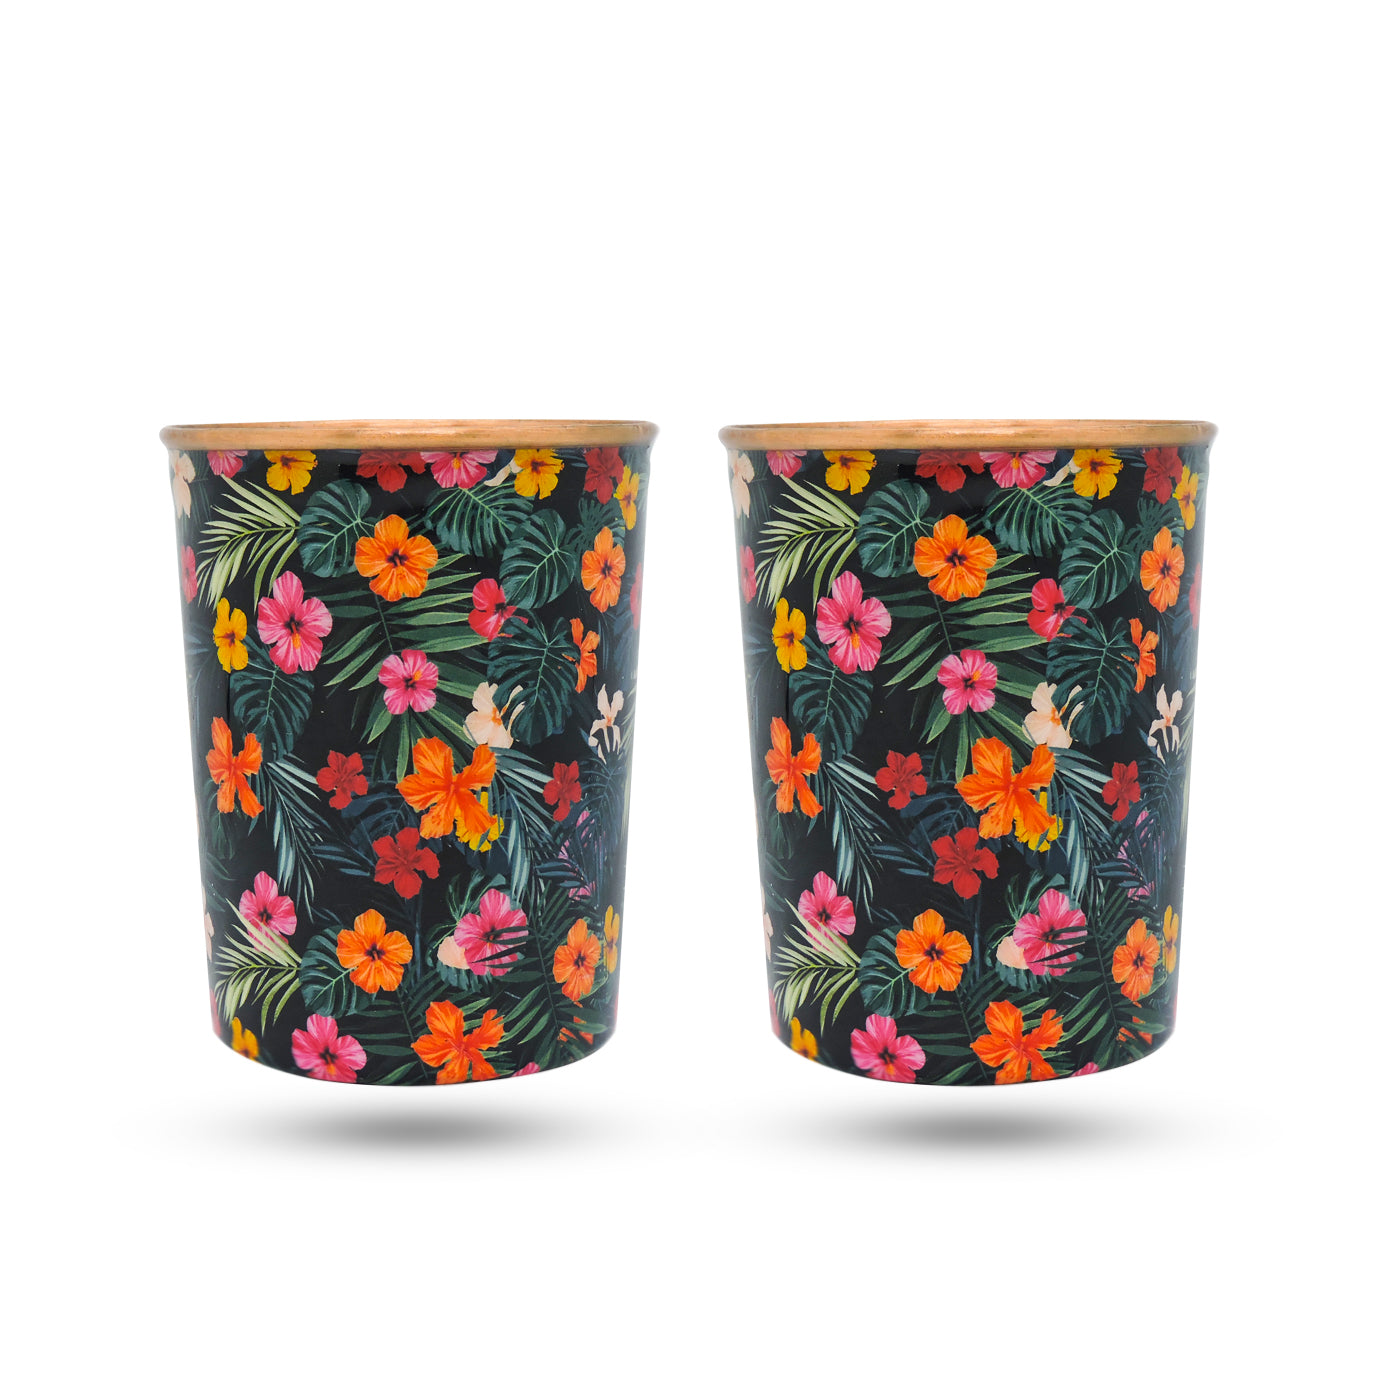 'Some Floral Talks While You Sip In' Printed Copper Glass (Set of Two)